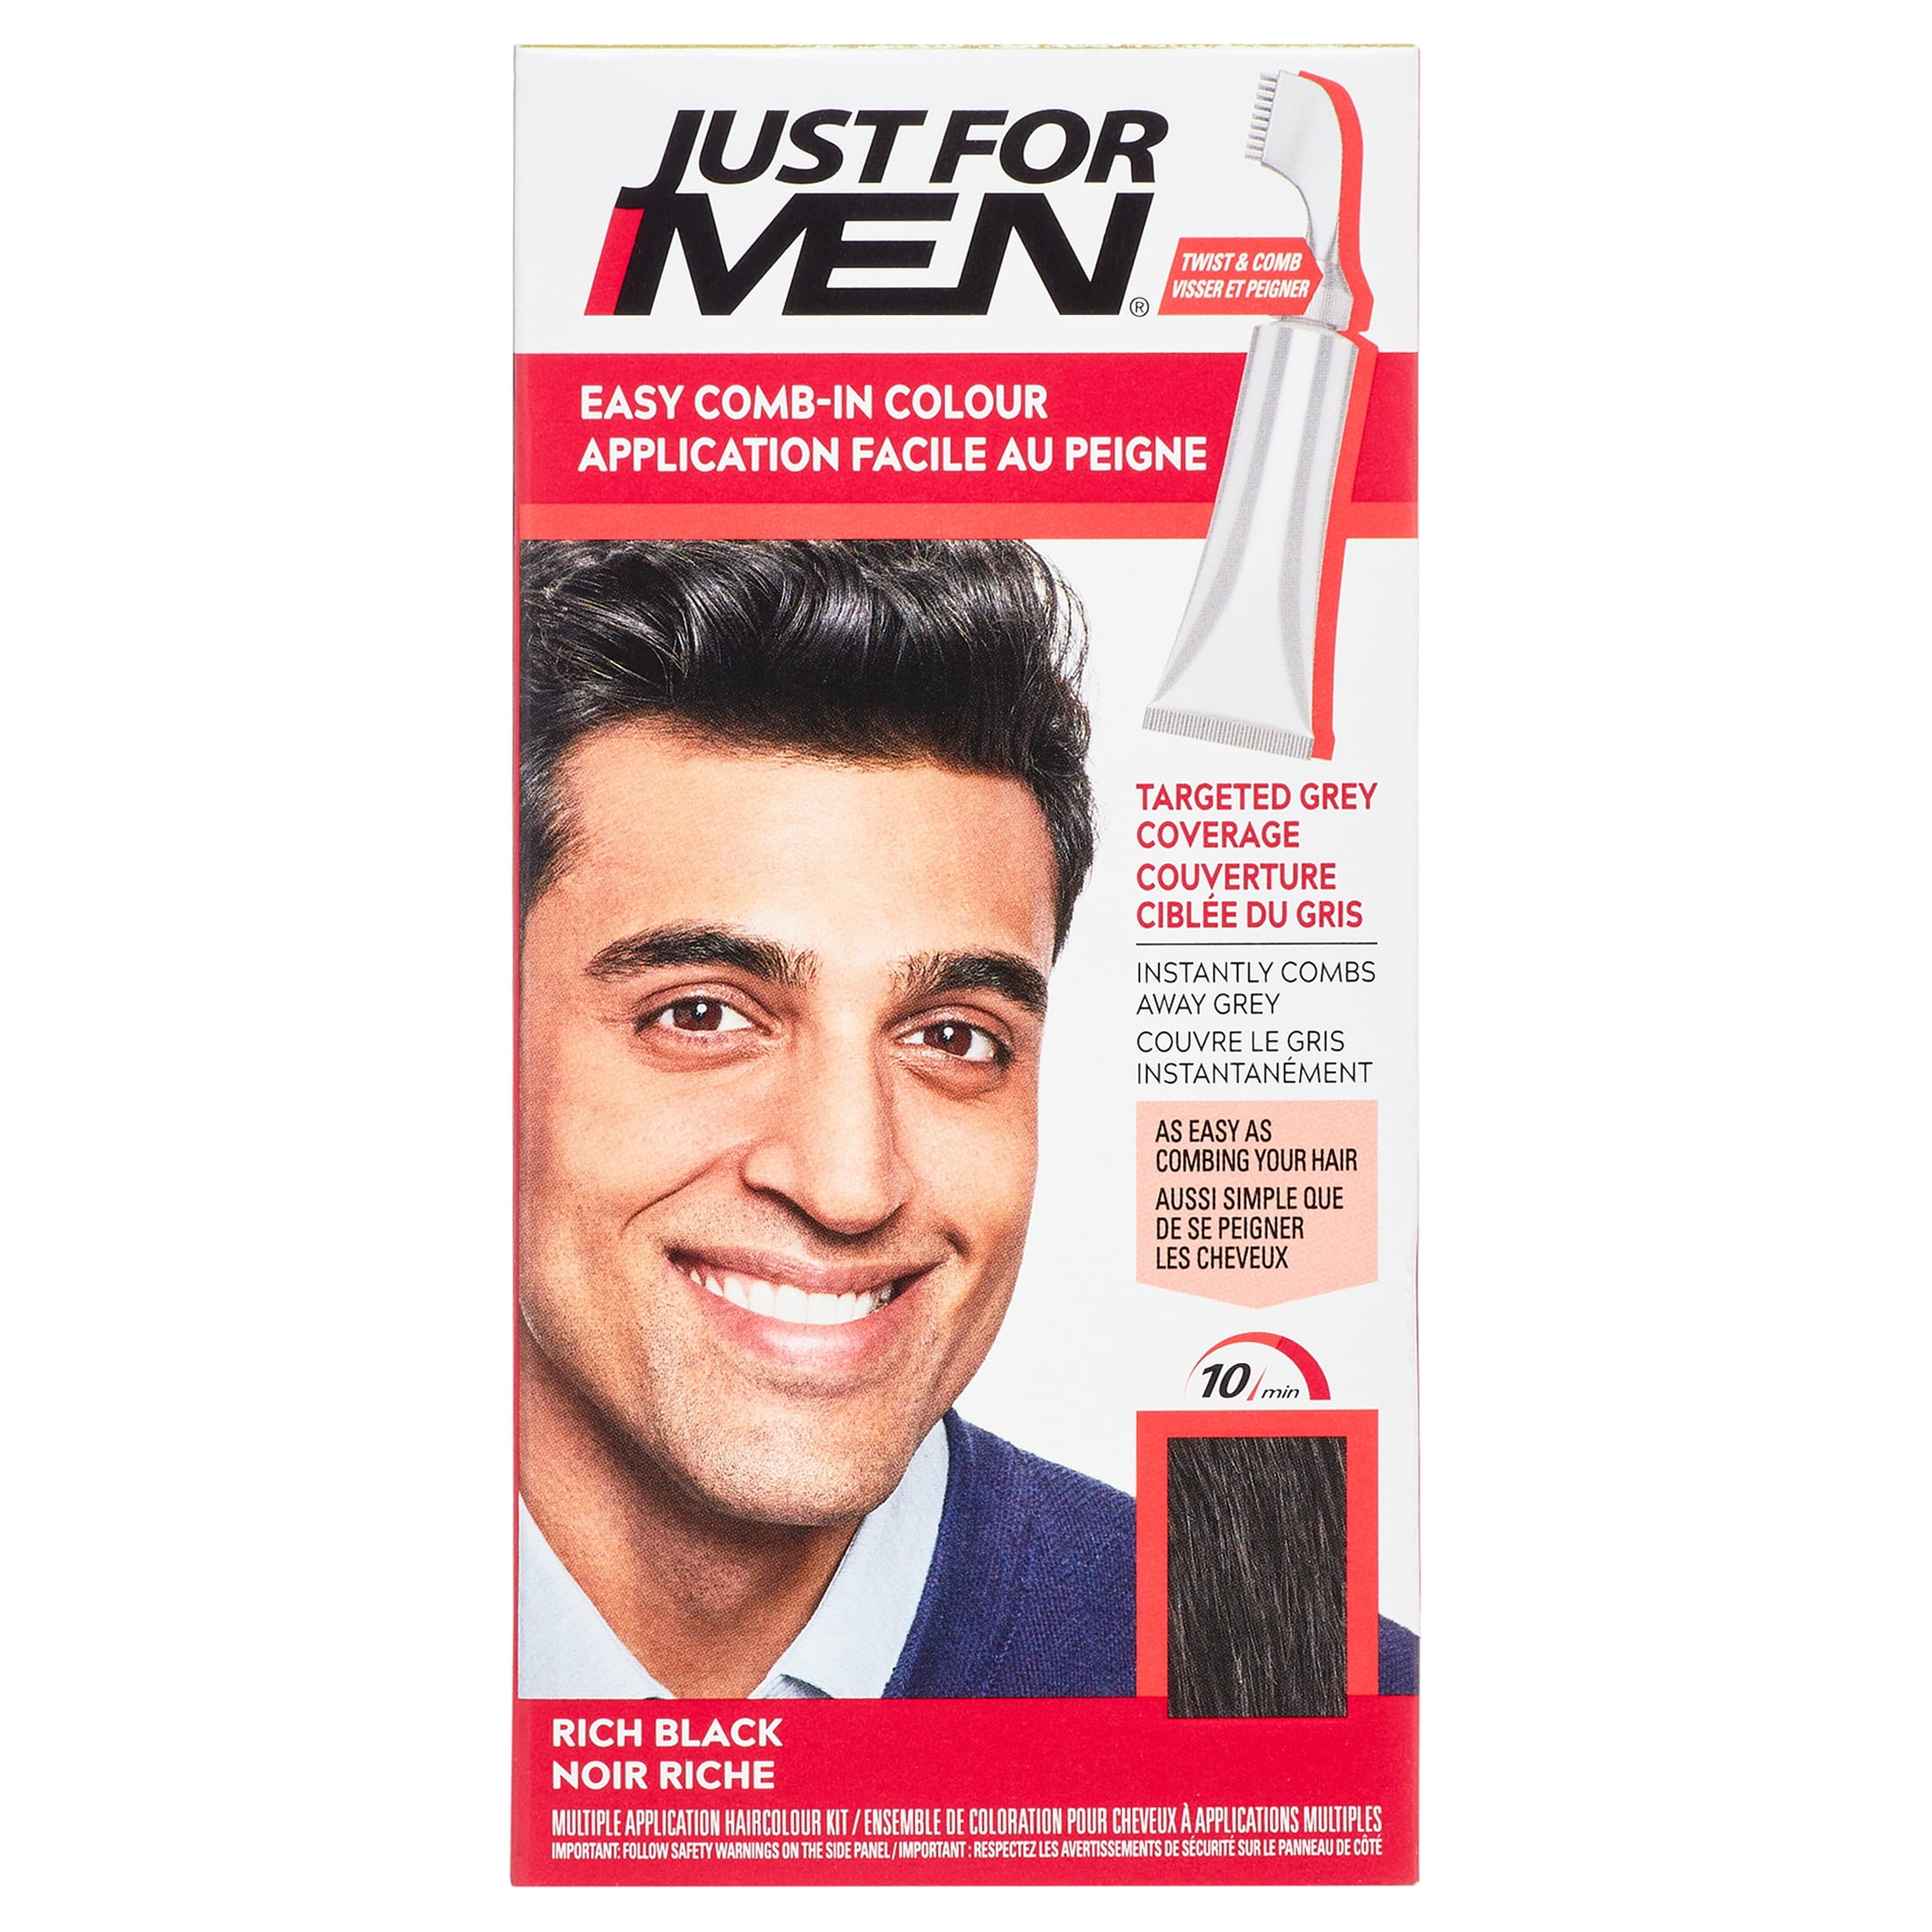 Just For Men Easy Comb-in Hair Color for Men with Applicator